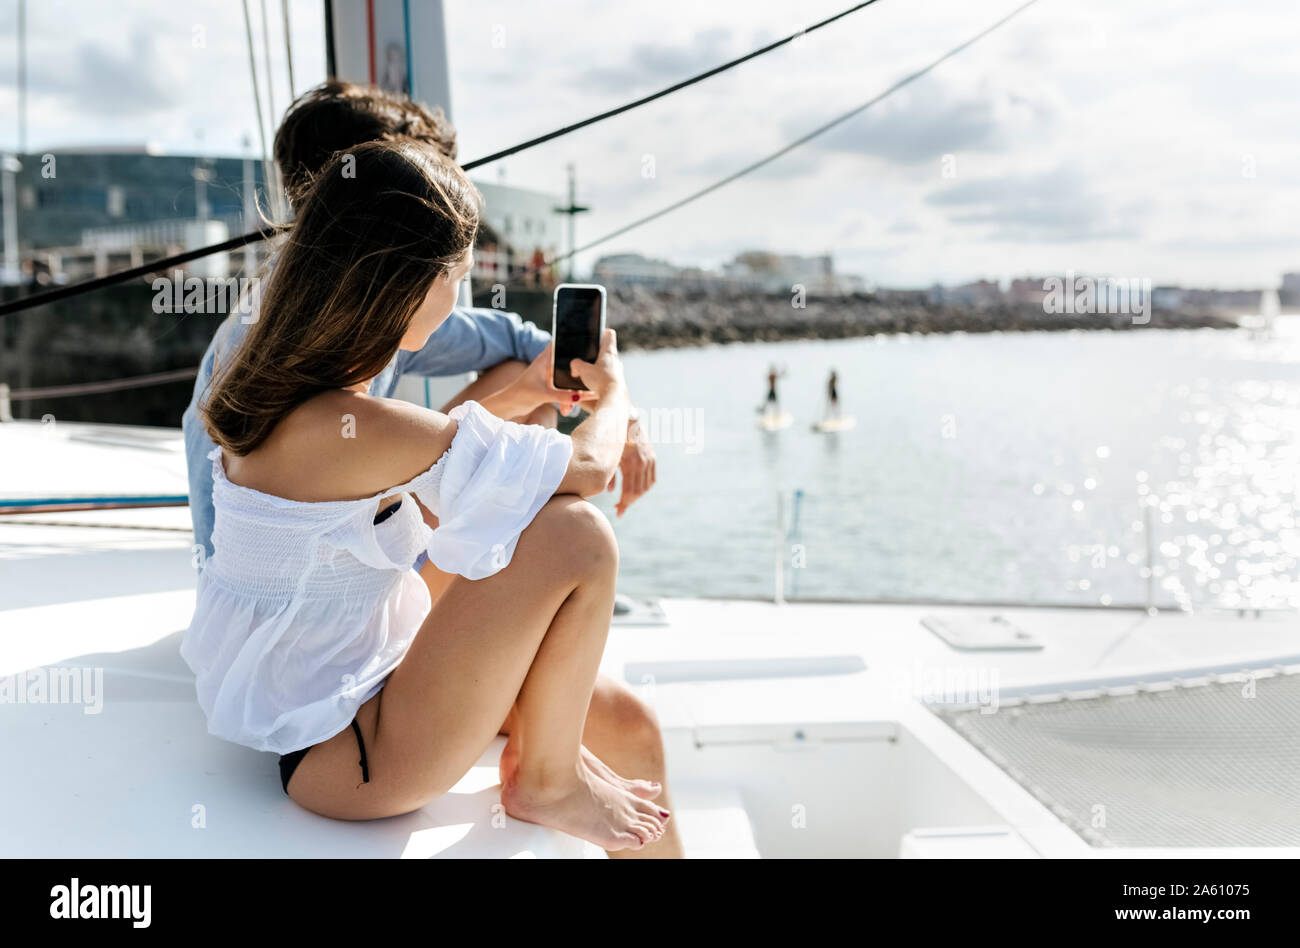 Young couple enjoying a summer day on a sailboat Stock Photo